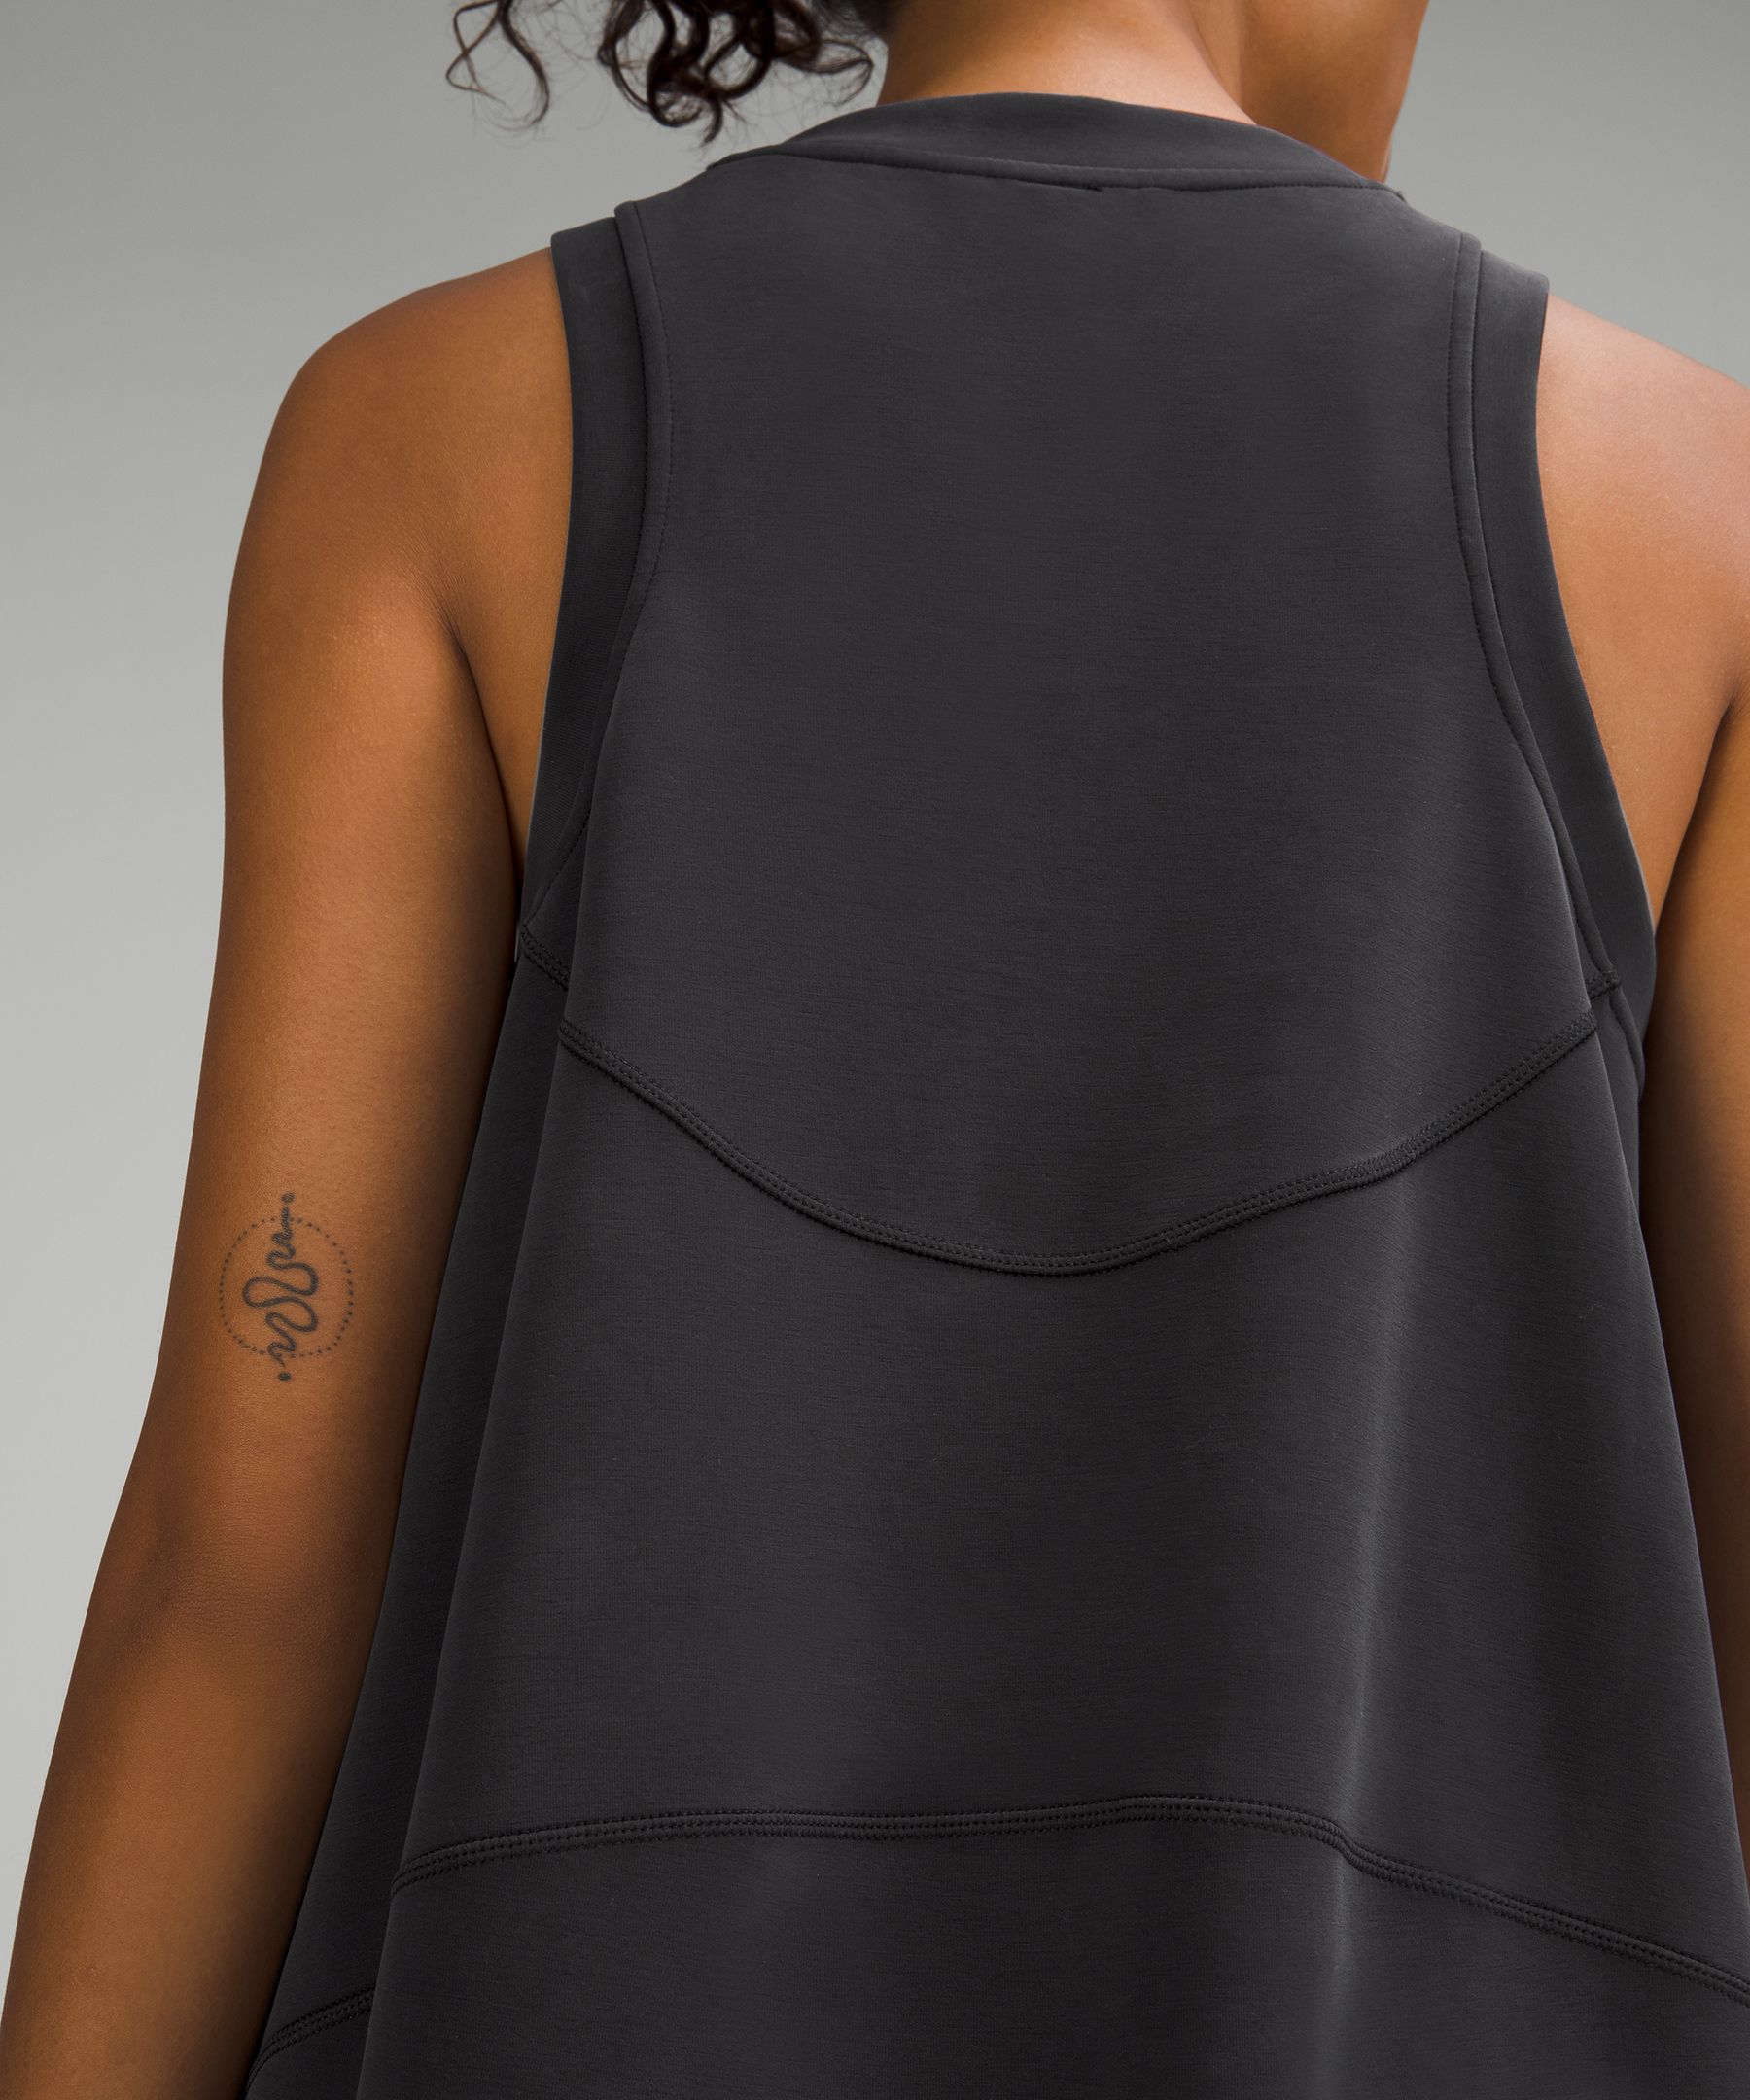 Lululemon Softstreme Back In Action Dress - Online Only